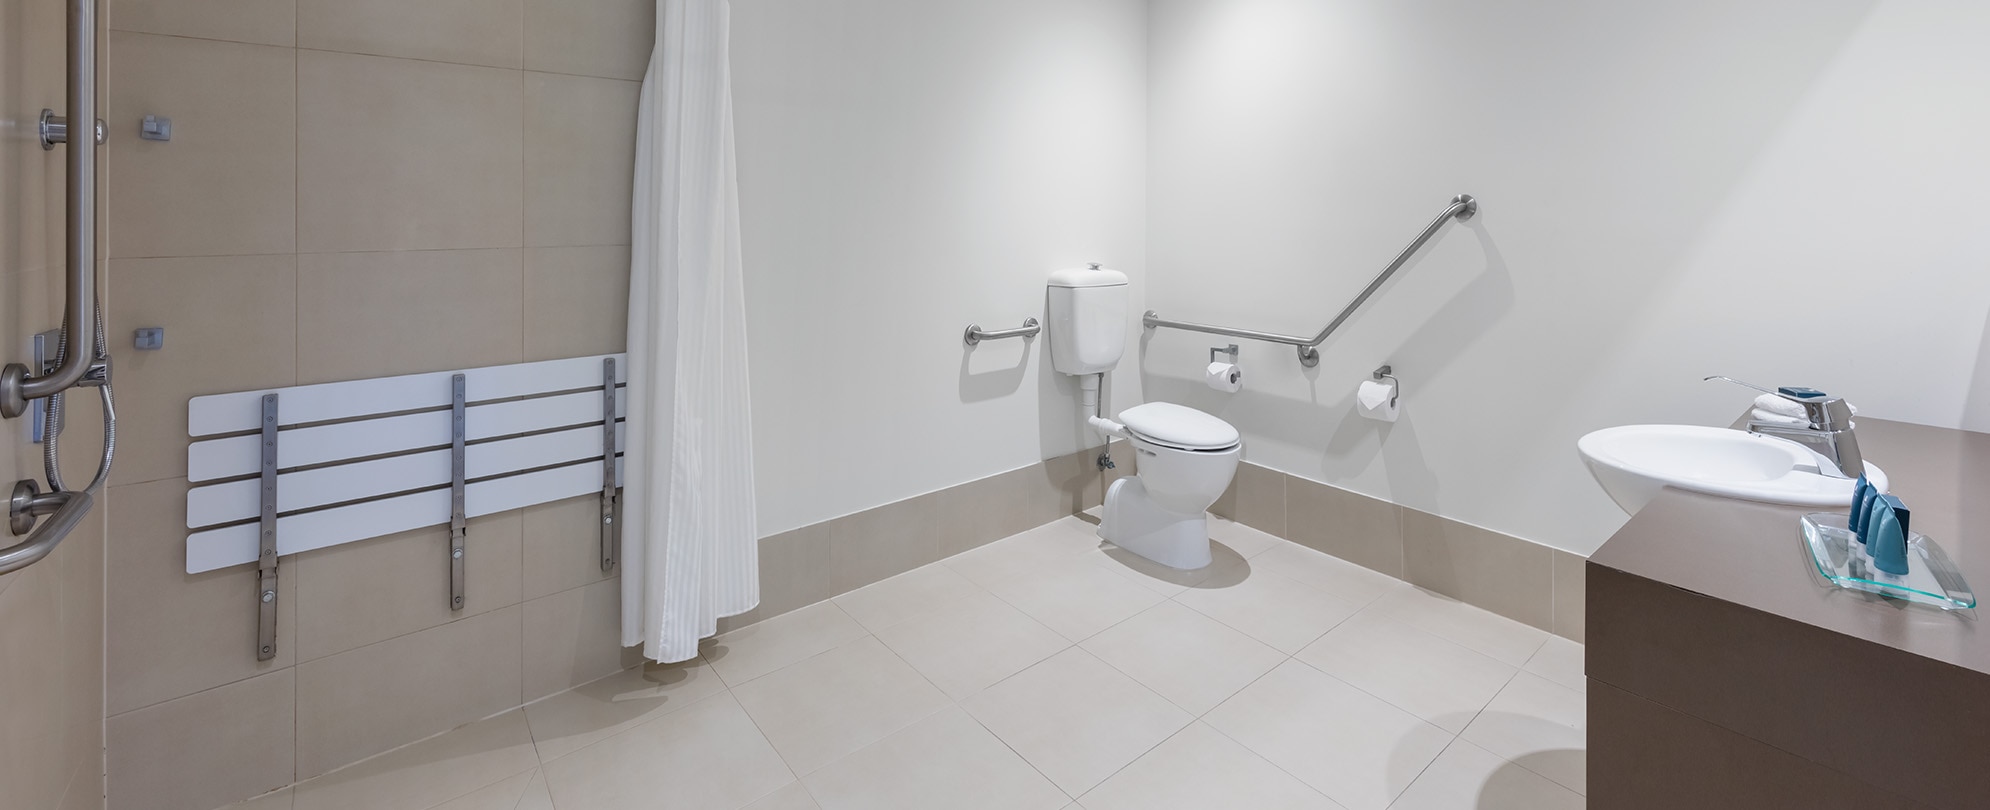 A bathroom, inside a 1-bedroom suite at Club Wyndham Torquay, equipped with accessible accessories. 